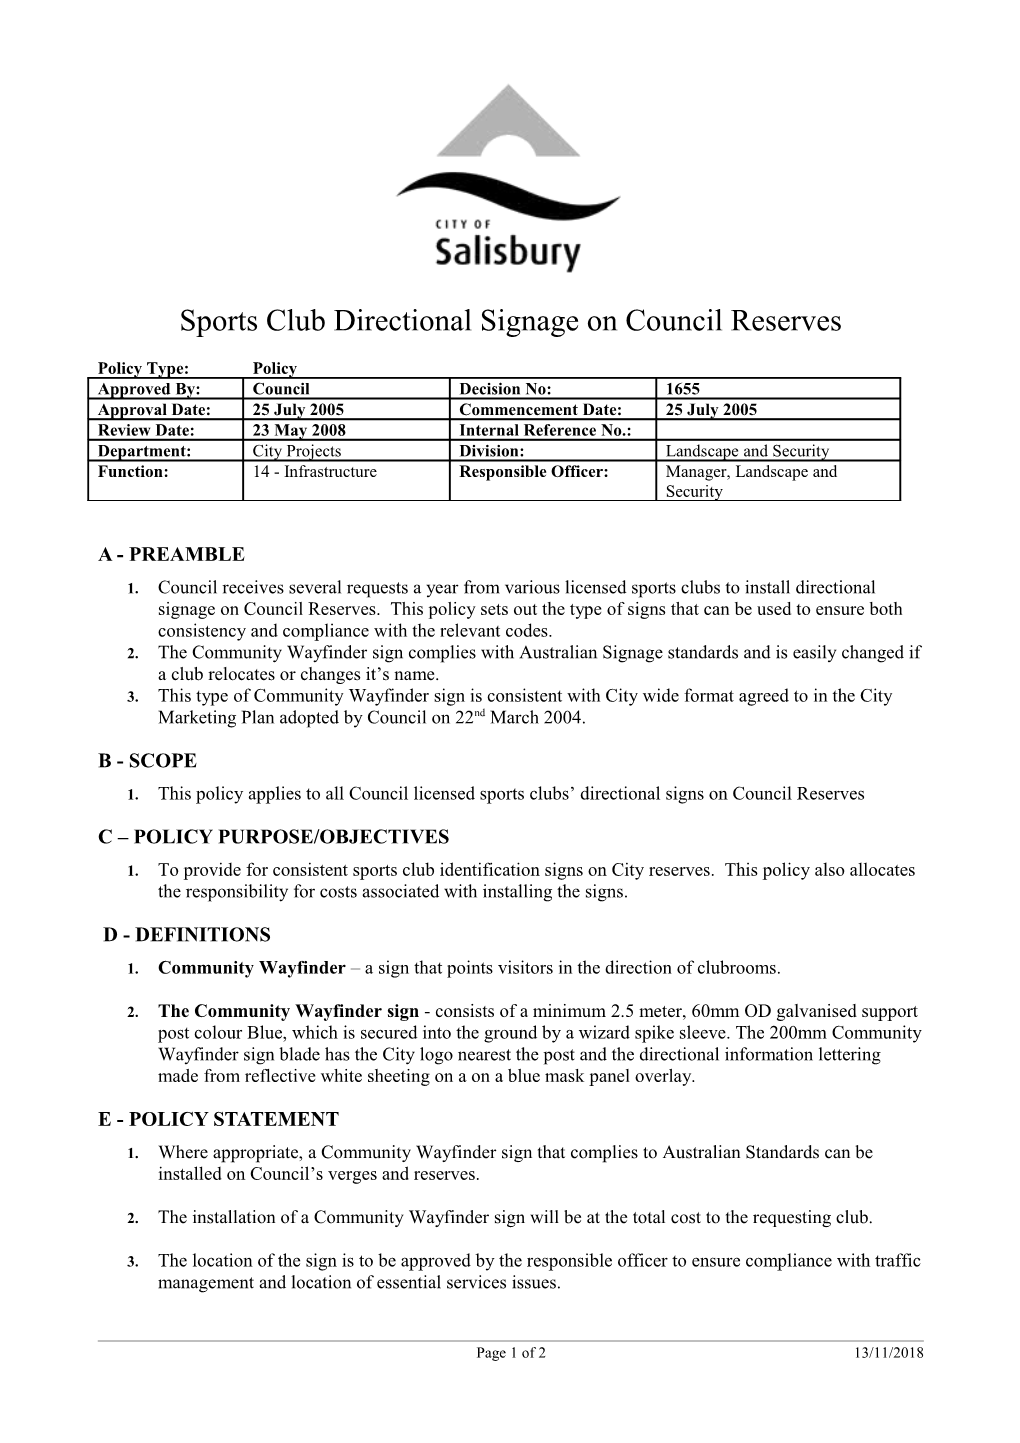 Sports Club Directional Signage on Council Reserves